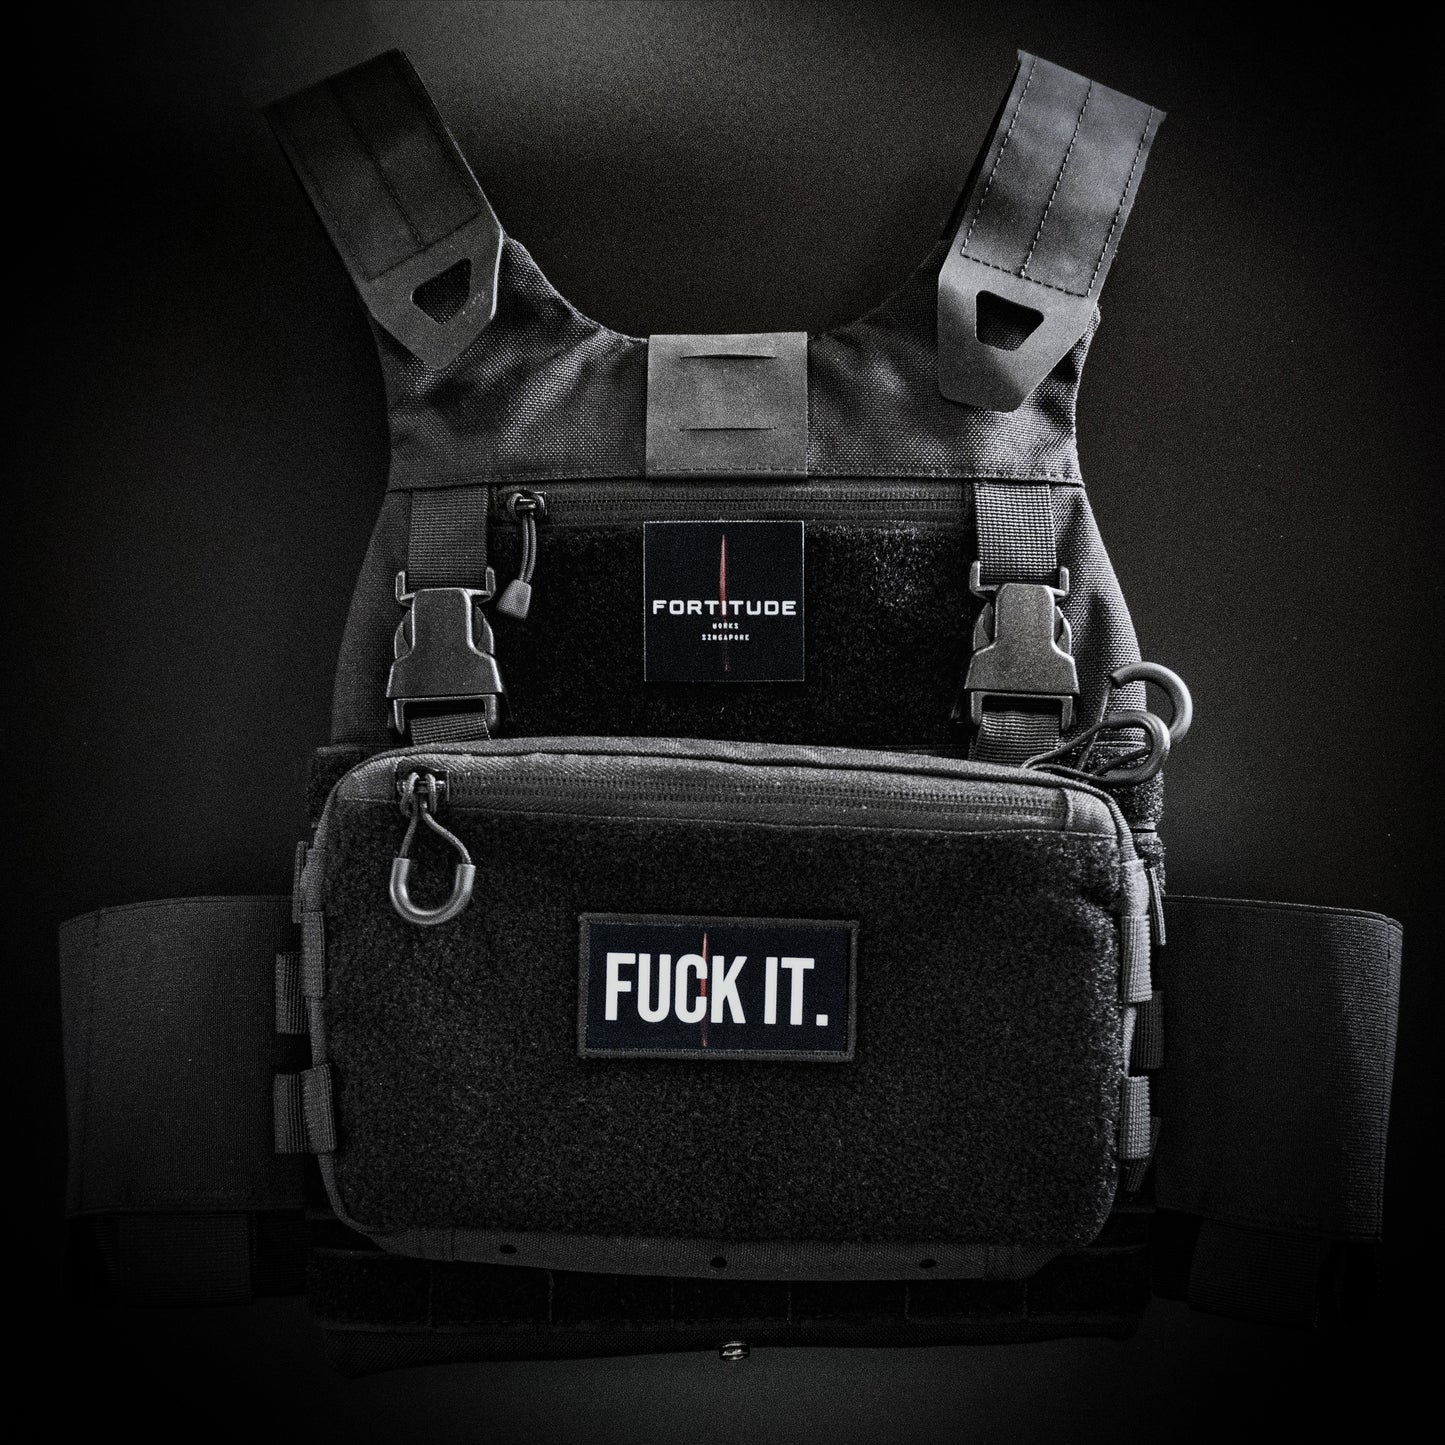 FUCK IT. - FORTITUDE WORKS SINGAPORE